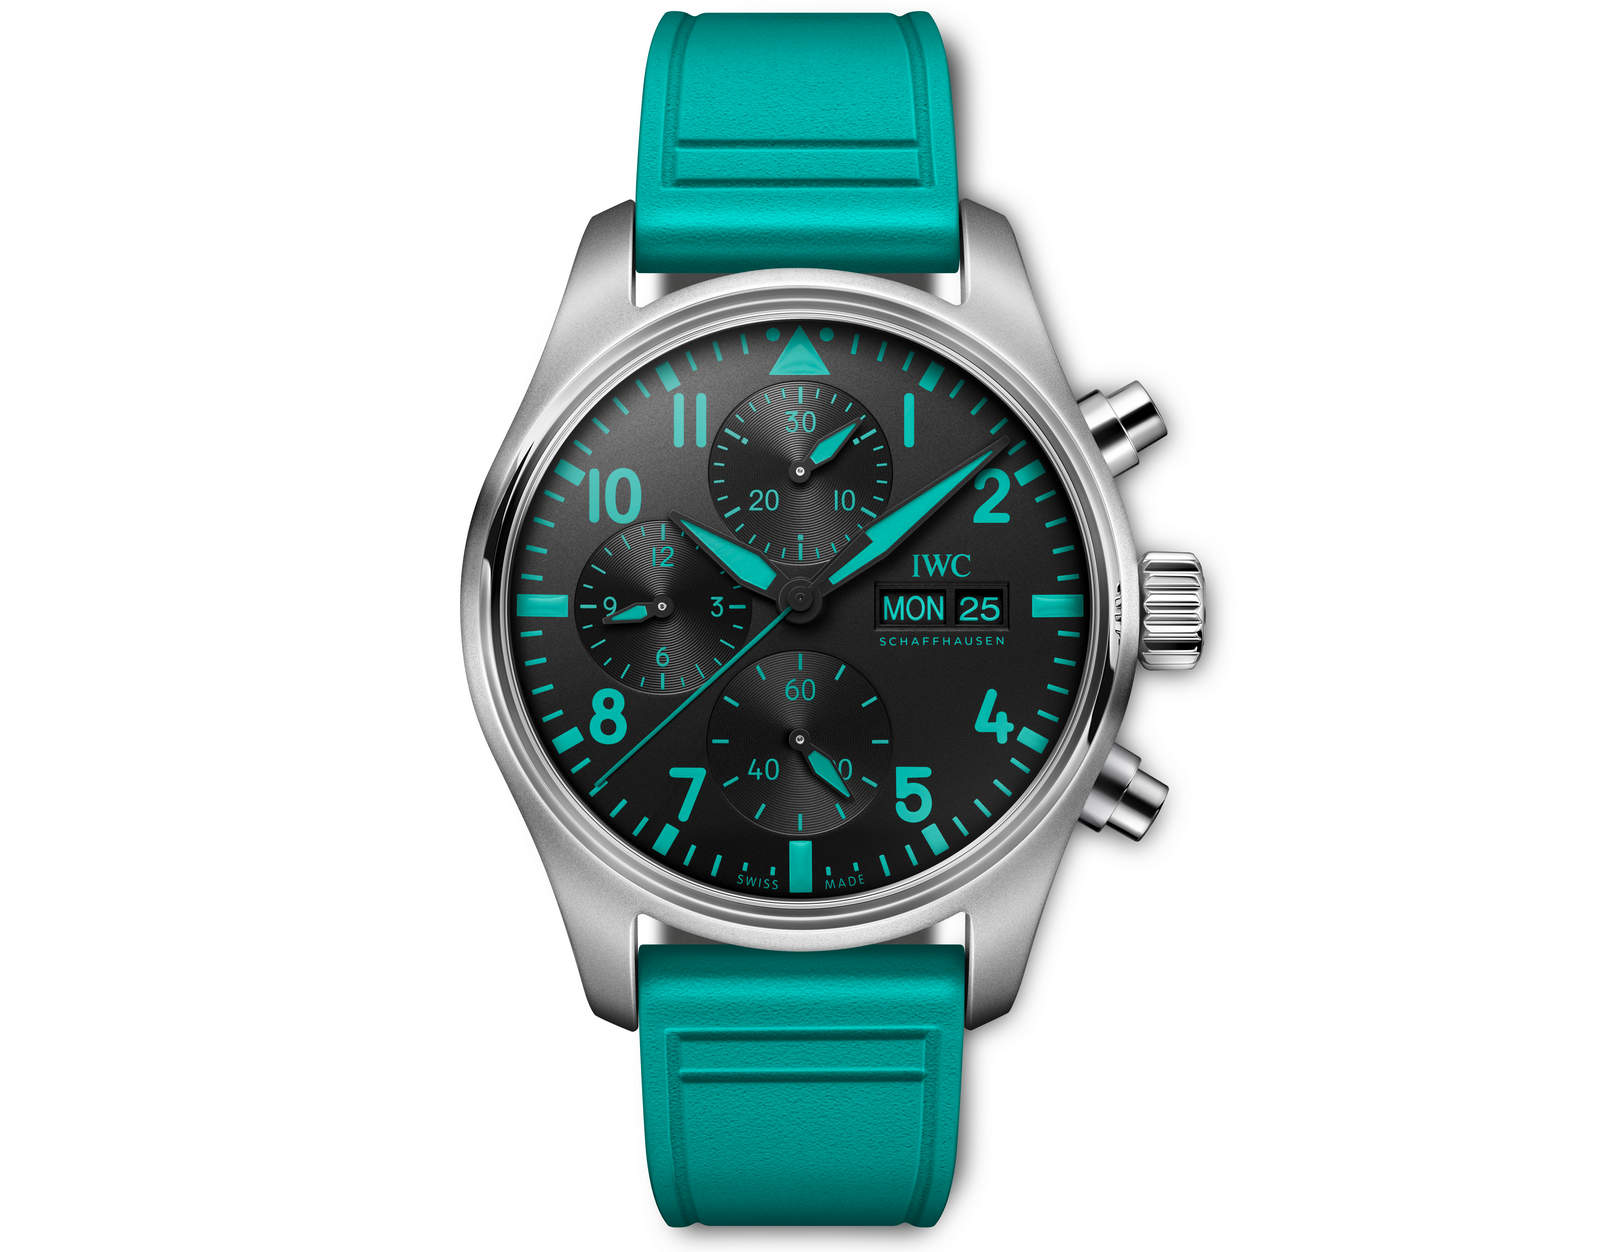 IWC has revealed the first official team watch for the Mercedes-AMG Petronas Formula One Team which is based on the Pilot?s Watch Chronograph 41